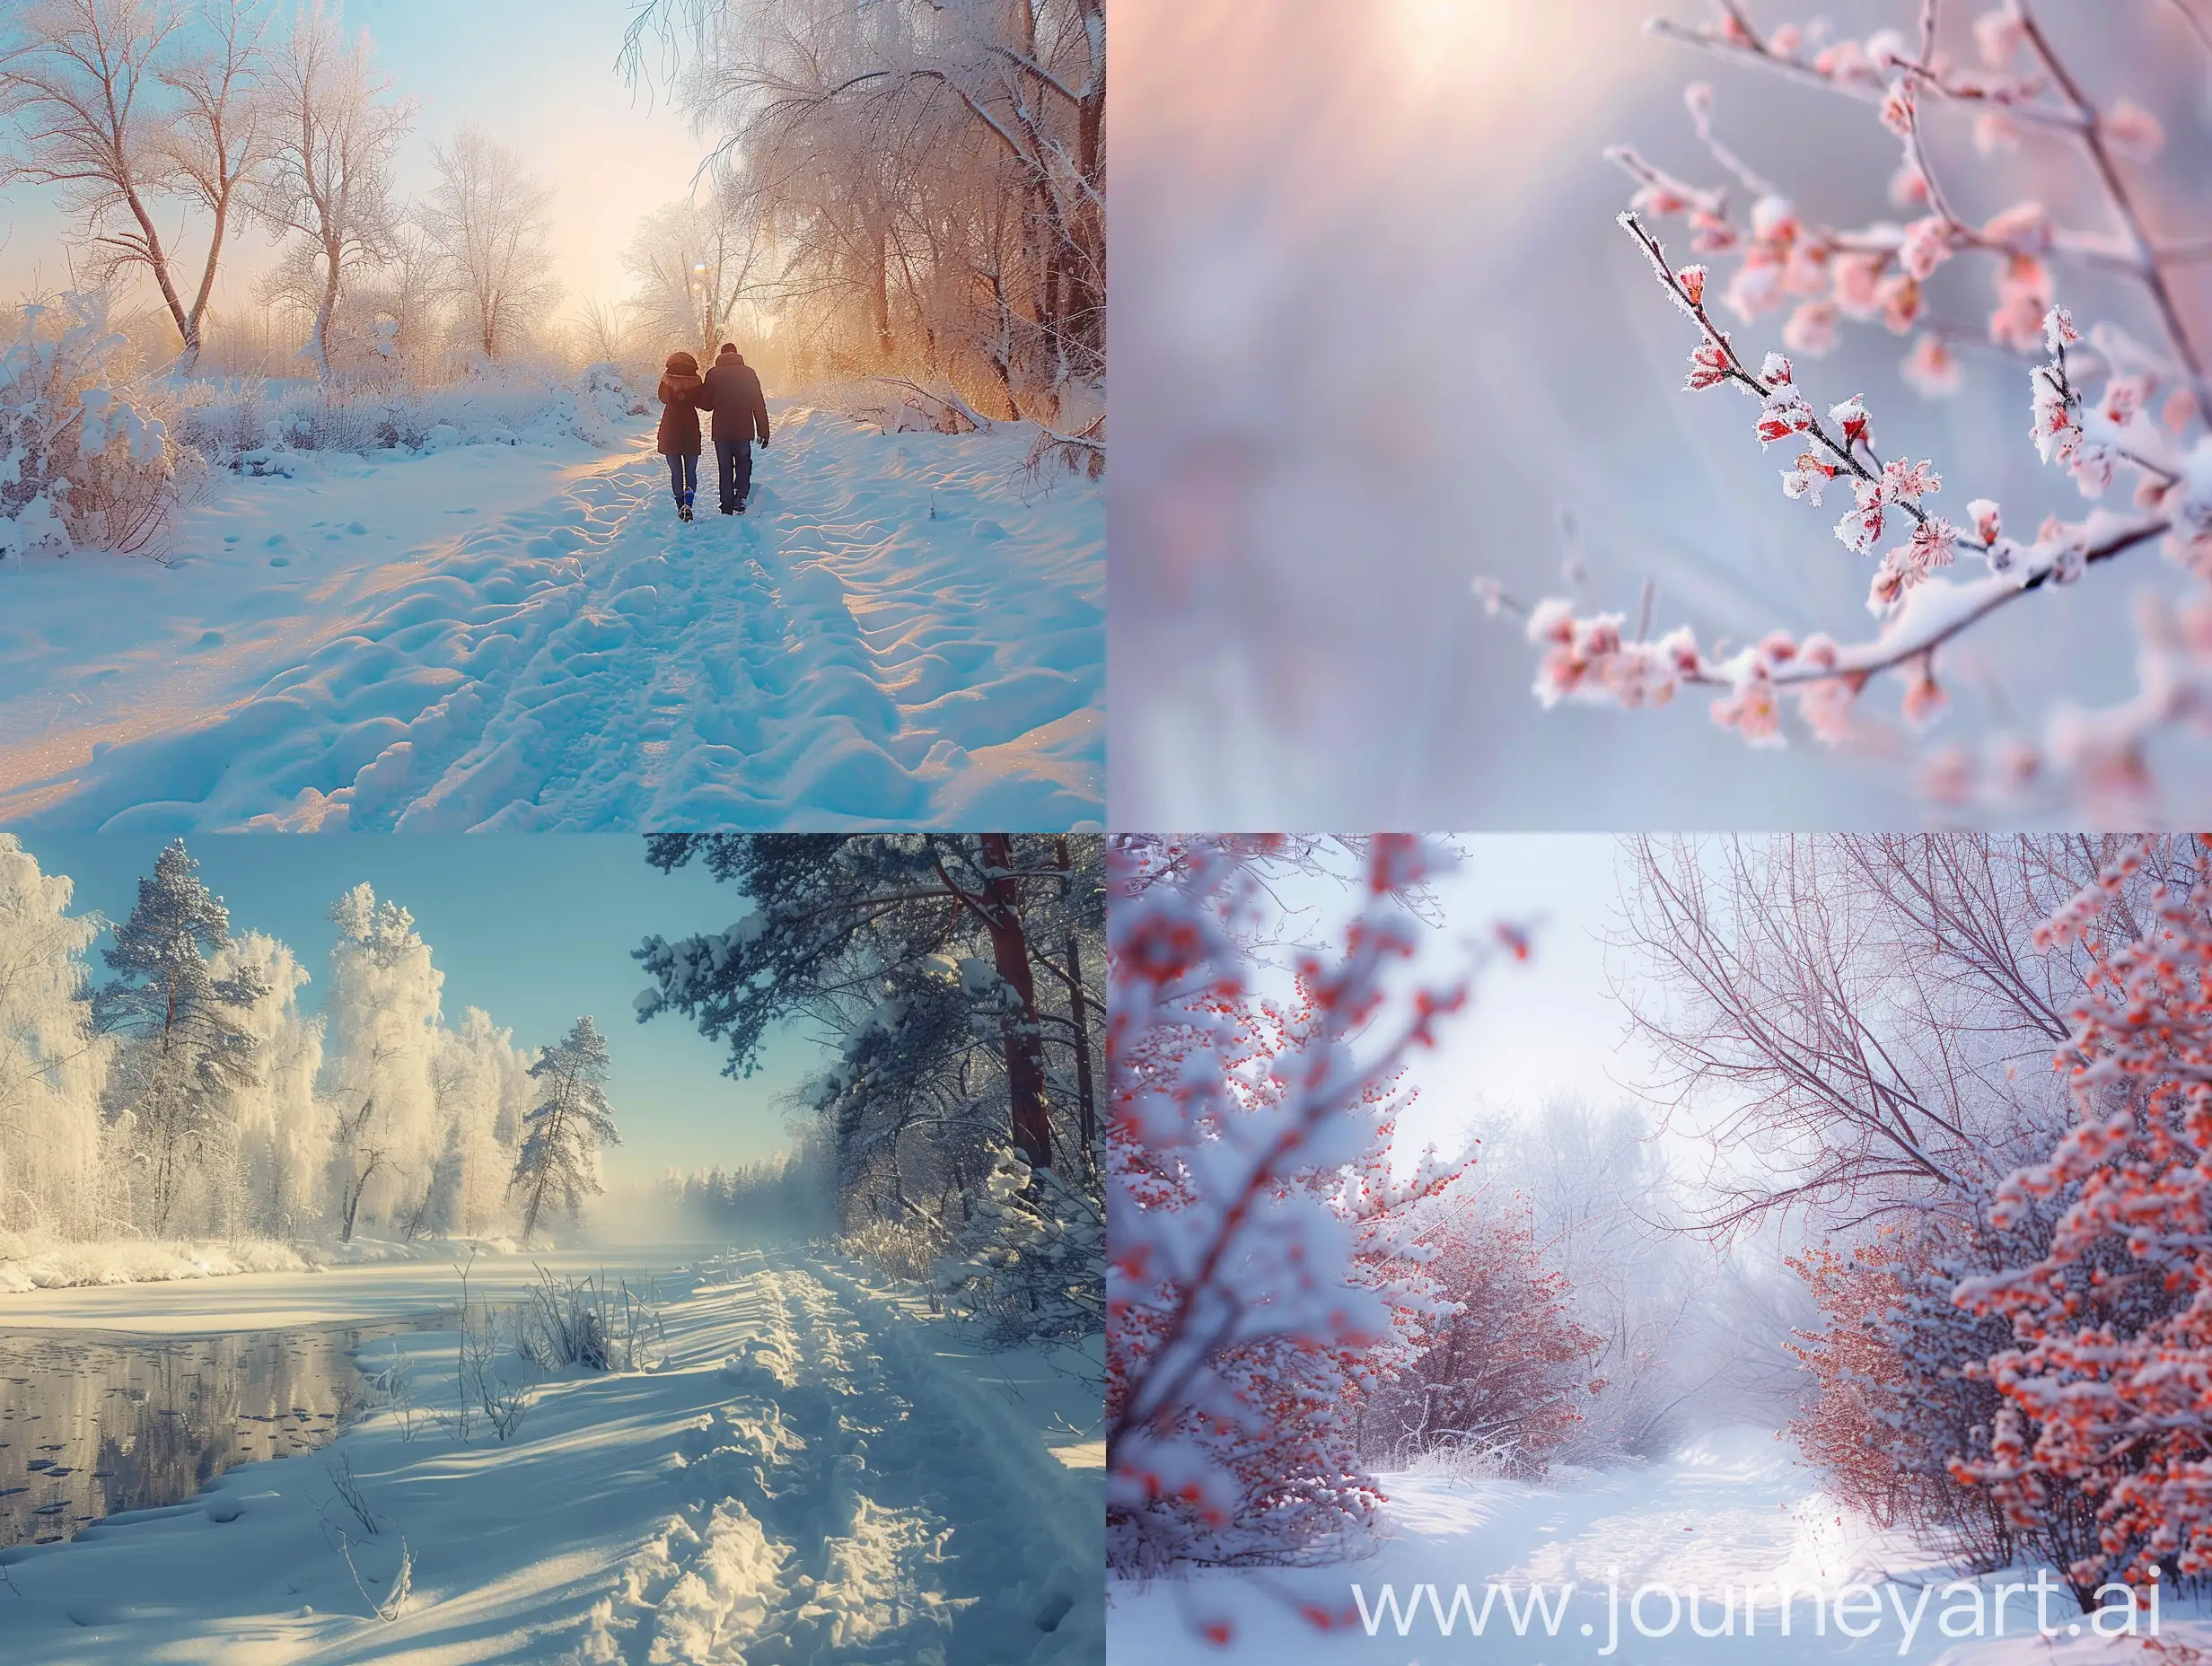 Make some real pictures of March and snow and winter. The photos are beautiful. be romantic